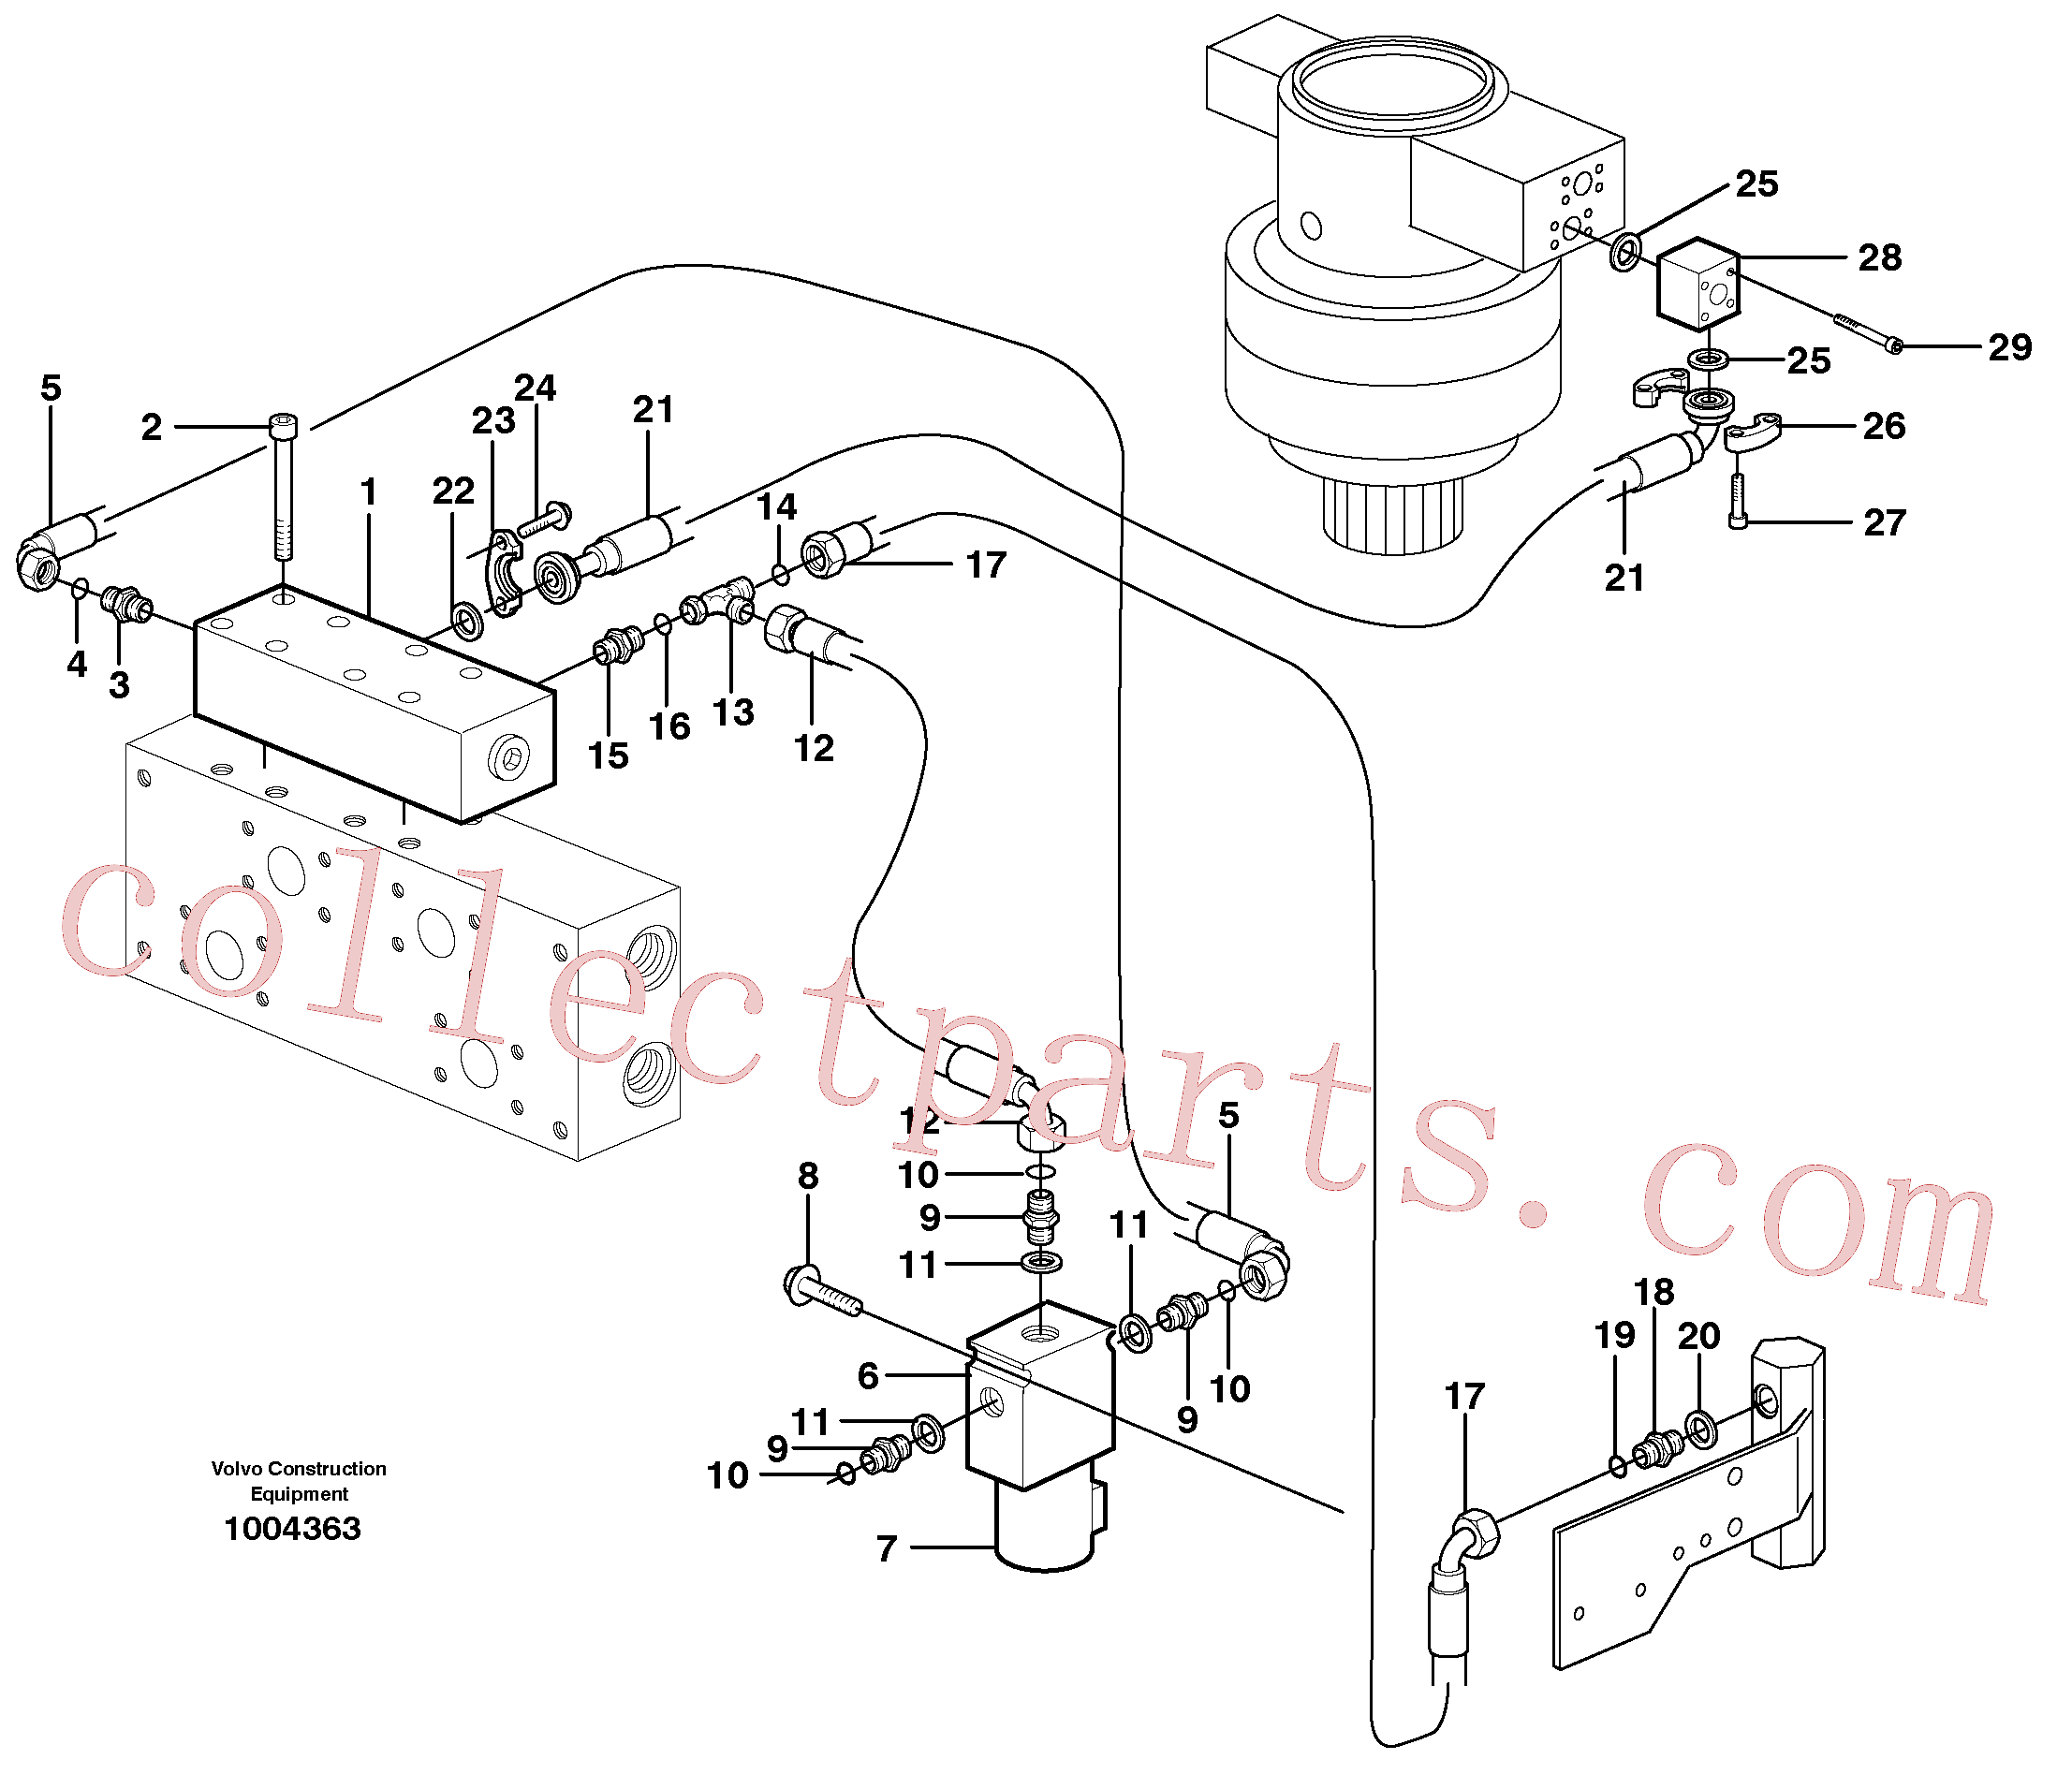 VOE14346520 for Volvo Hydraulic system, Float position valve(1004363 assembly)